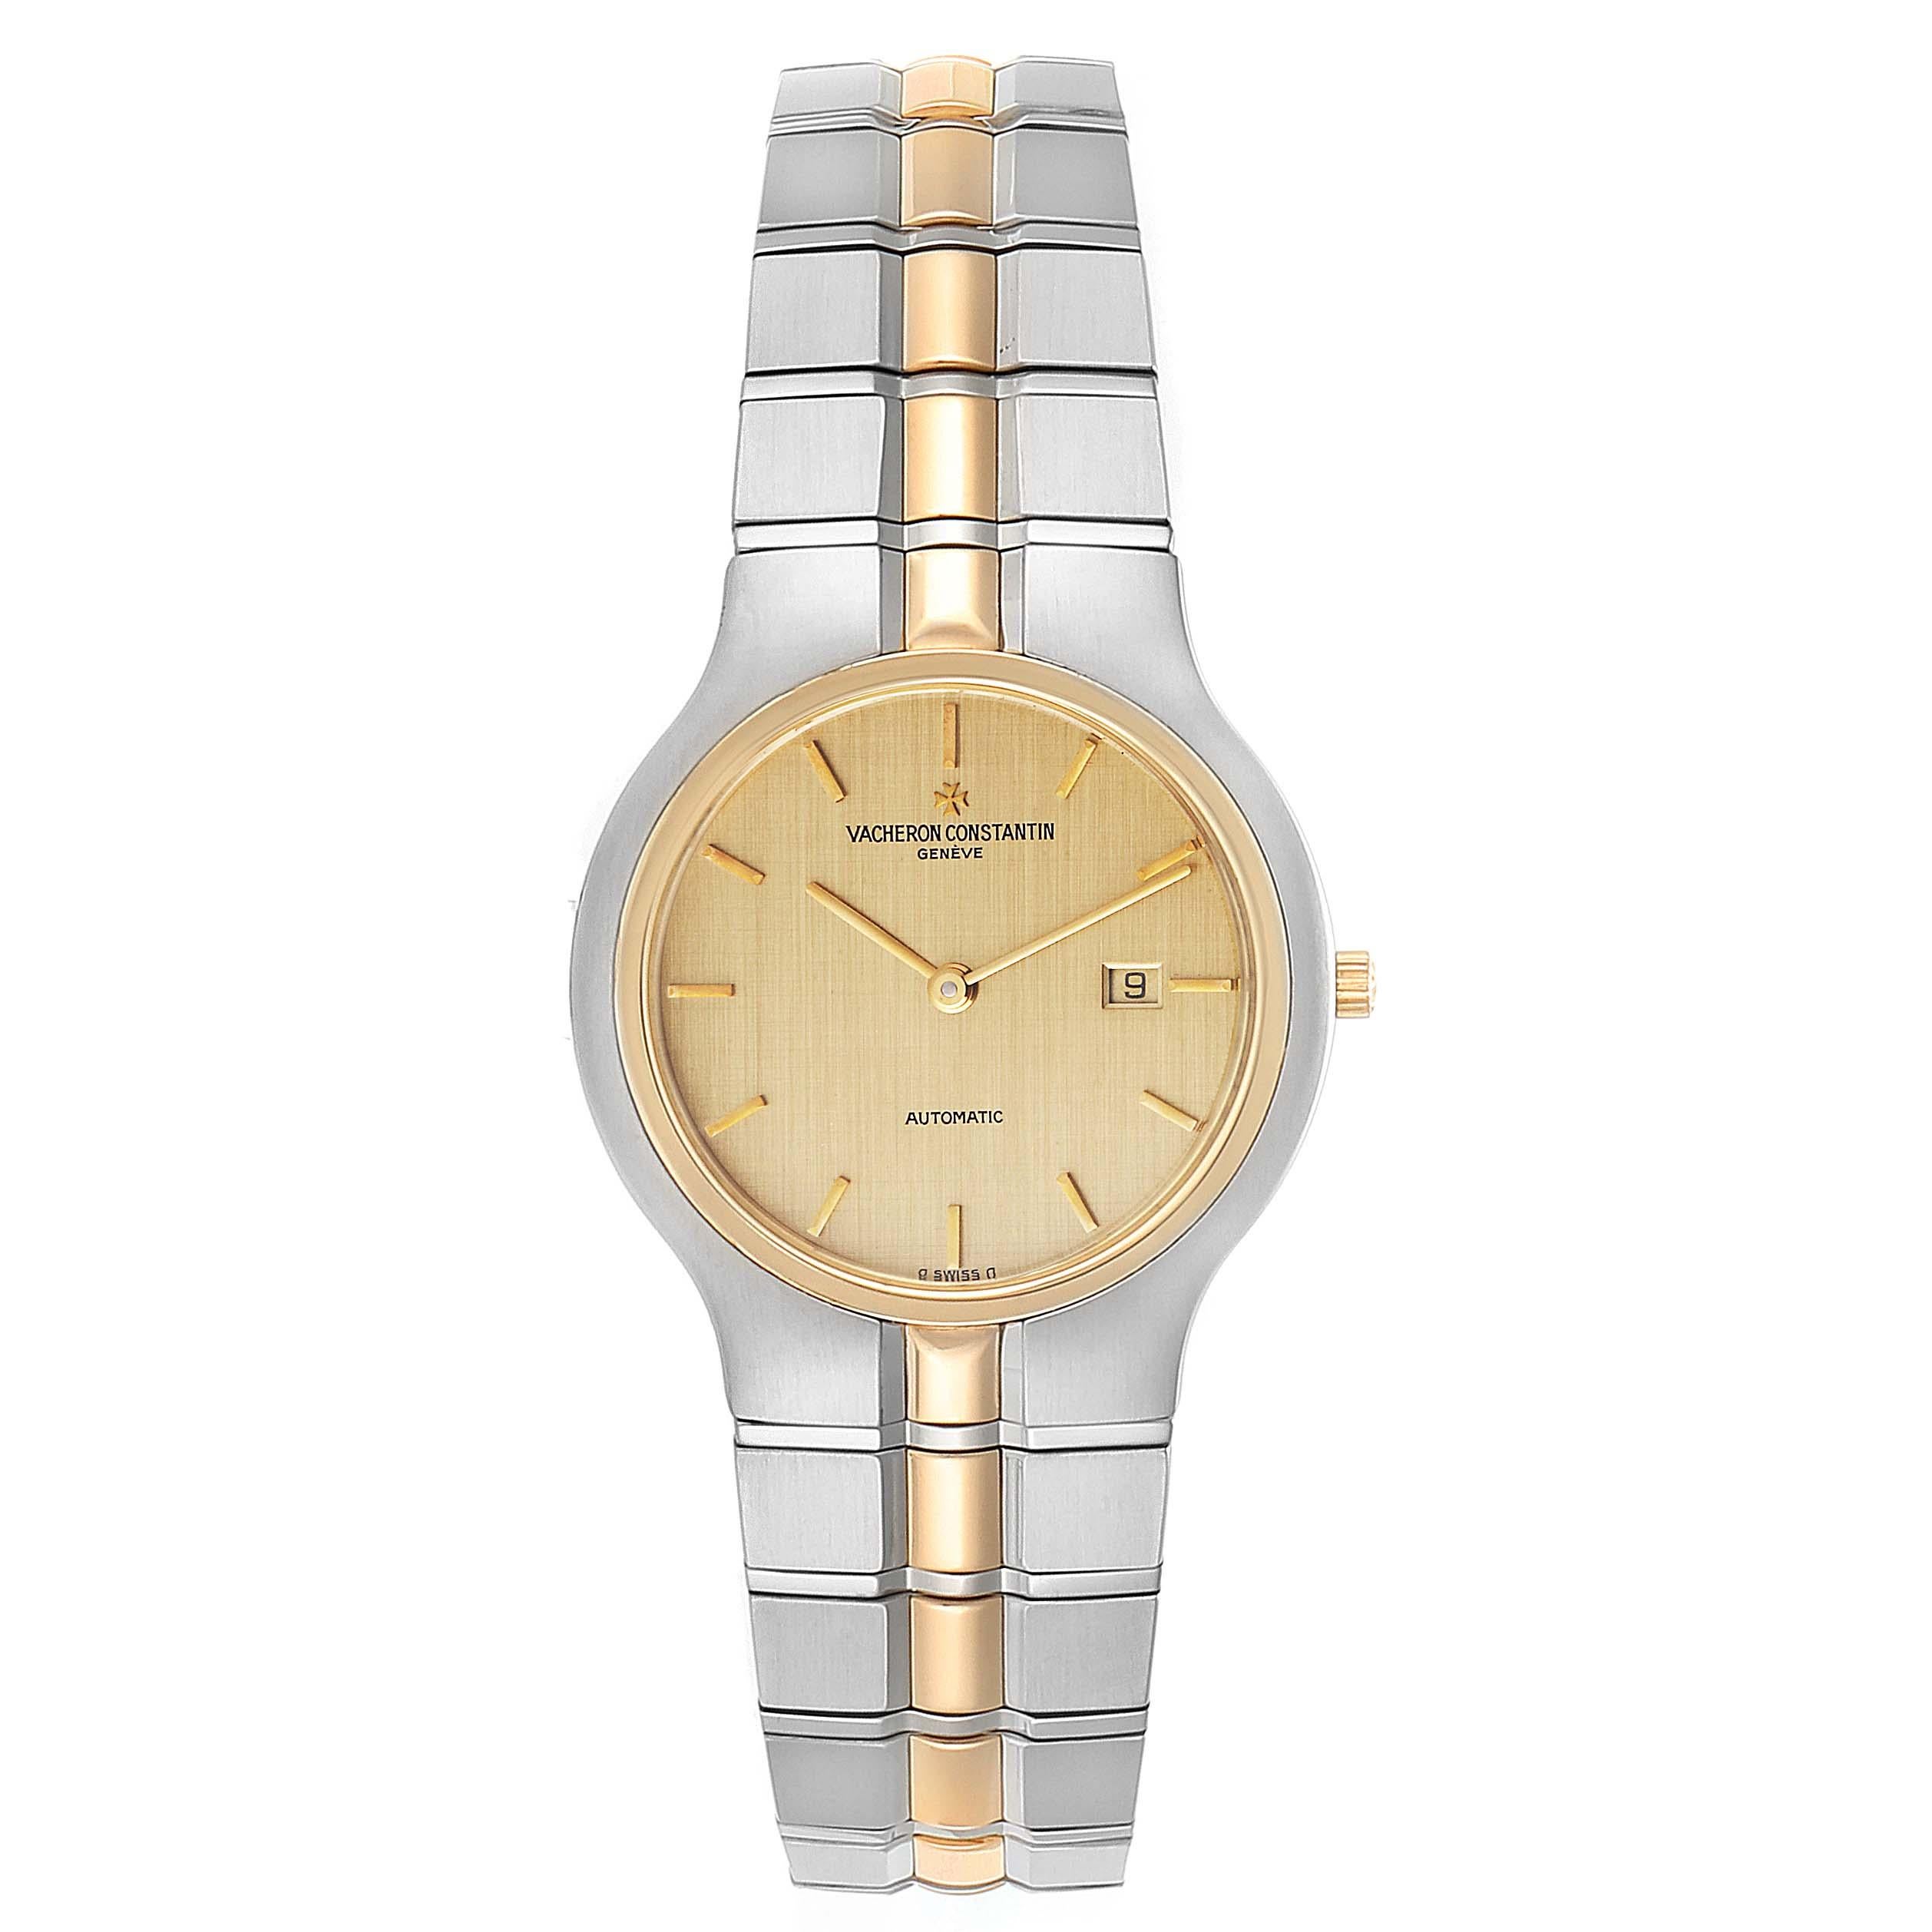 Vacheron Constantin Phidias 33 Steel Yellow Gold Ladies Watch 25750 Card. Quartz movement. Brushed stainless steel case 33.0 mm in diameter. 18K yellow gold winding crown with the Vacheron Maltese cross, and a solid case back secured with 8 screws